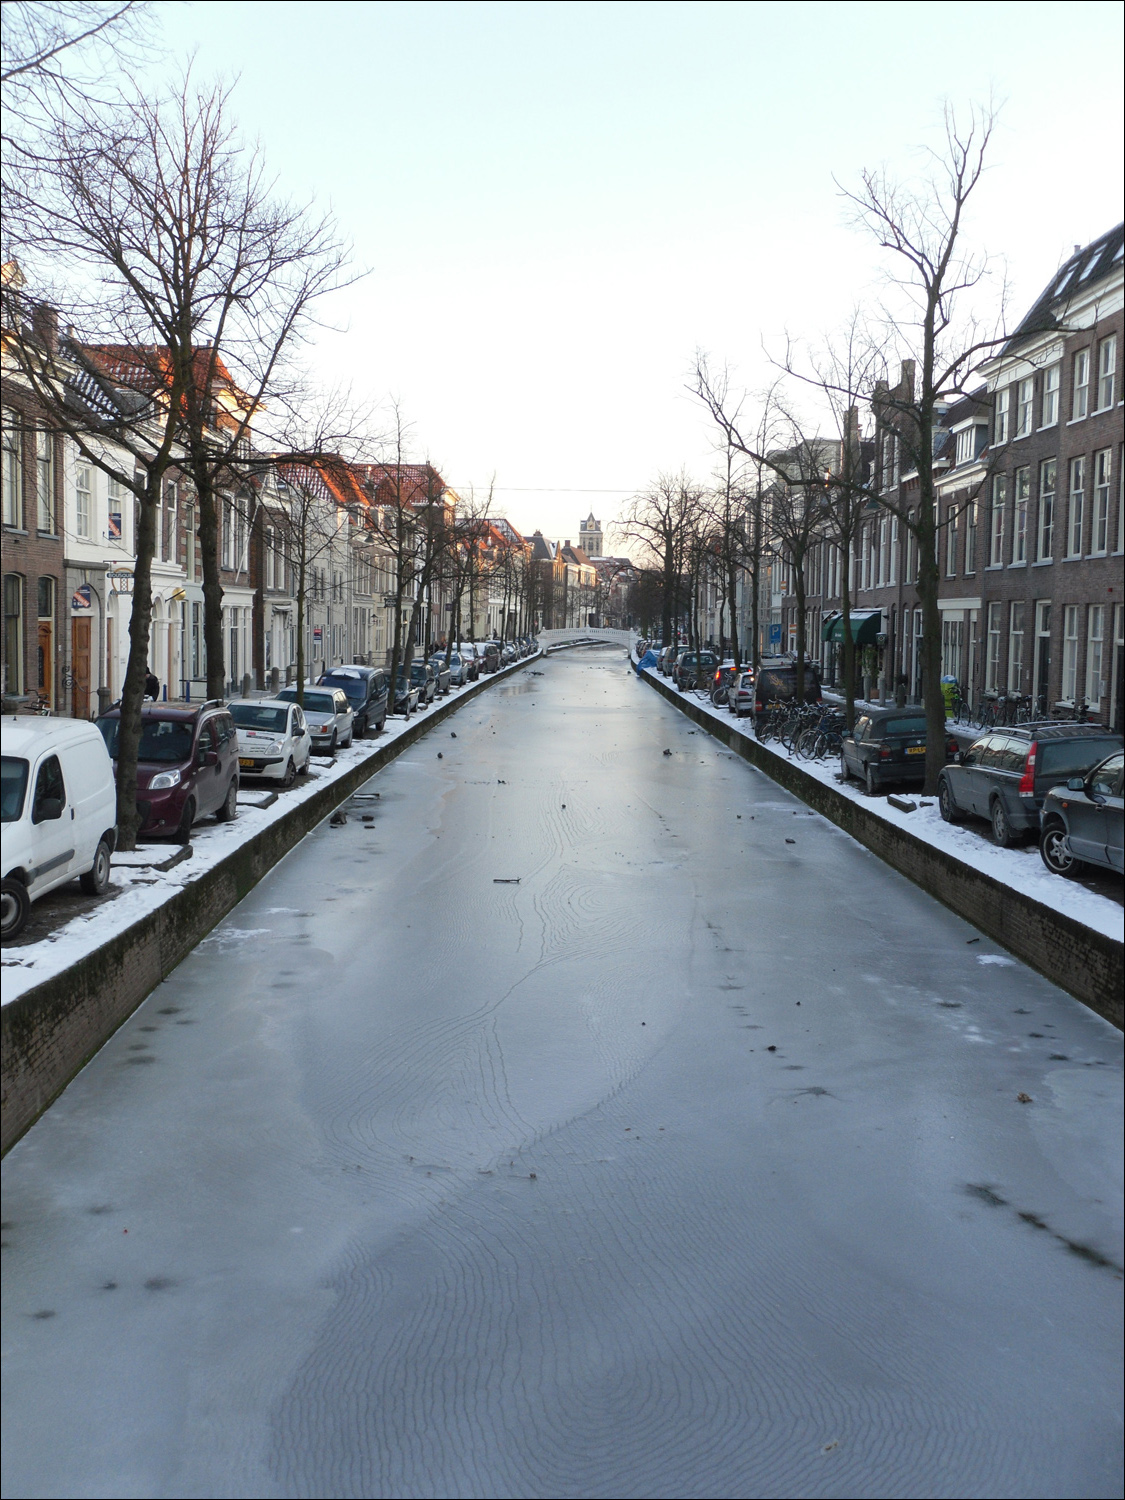 Delft-typical canal/street (frozen), note there are no guards to prevent cars from driving into canal by accident